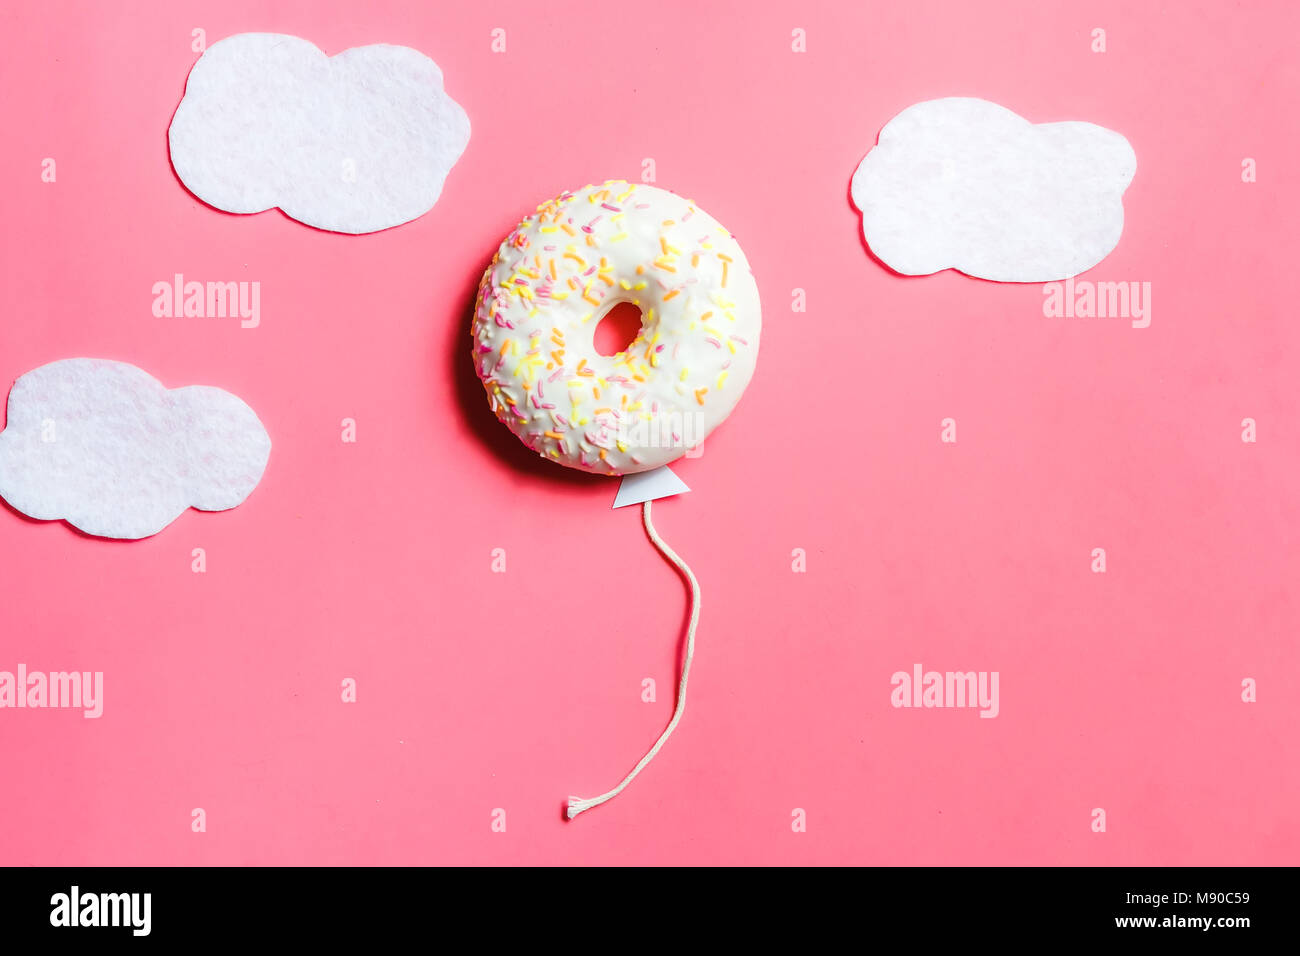 Donut on Pink Background, Creative Food Minimalism, Donut in Shape of Balloon in Sky with Clouds, Top View with Copy Space, Toned Stock Photo